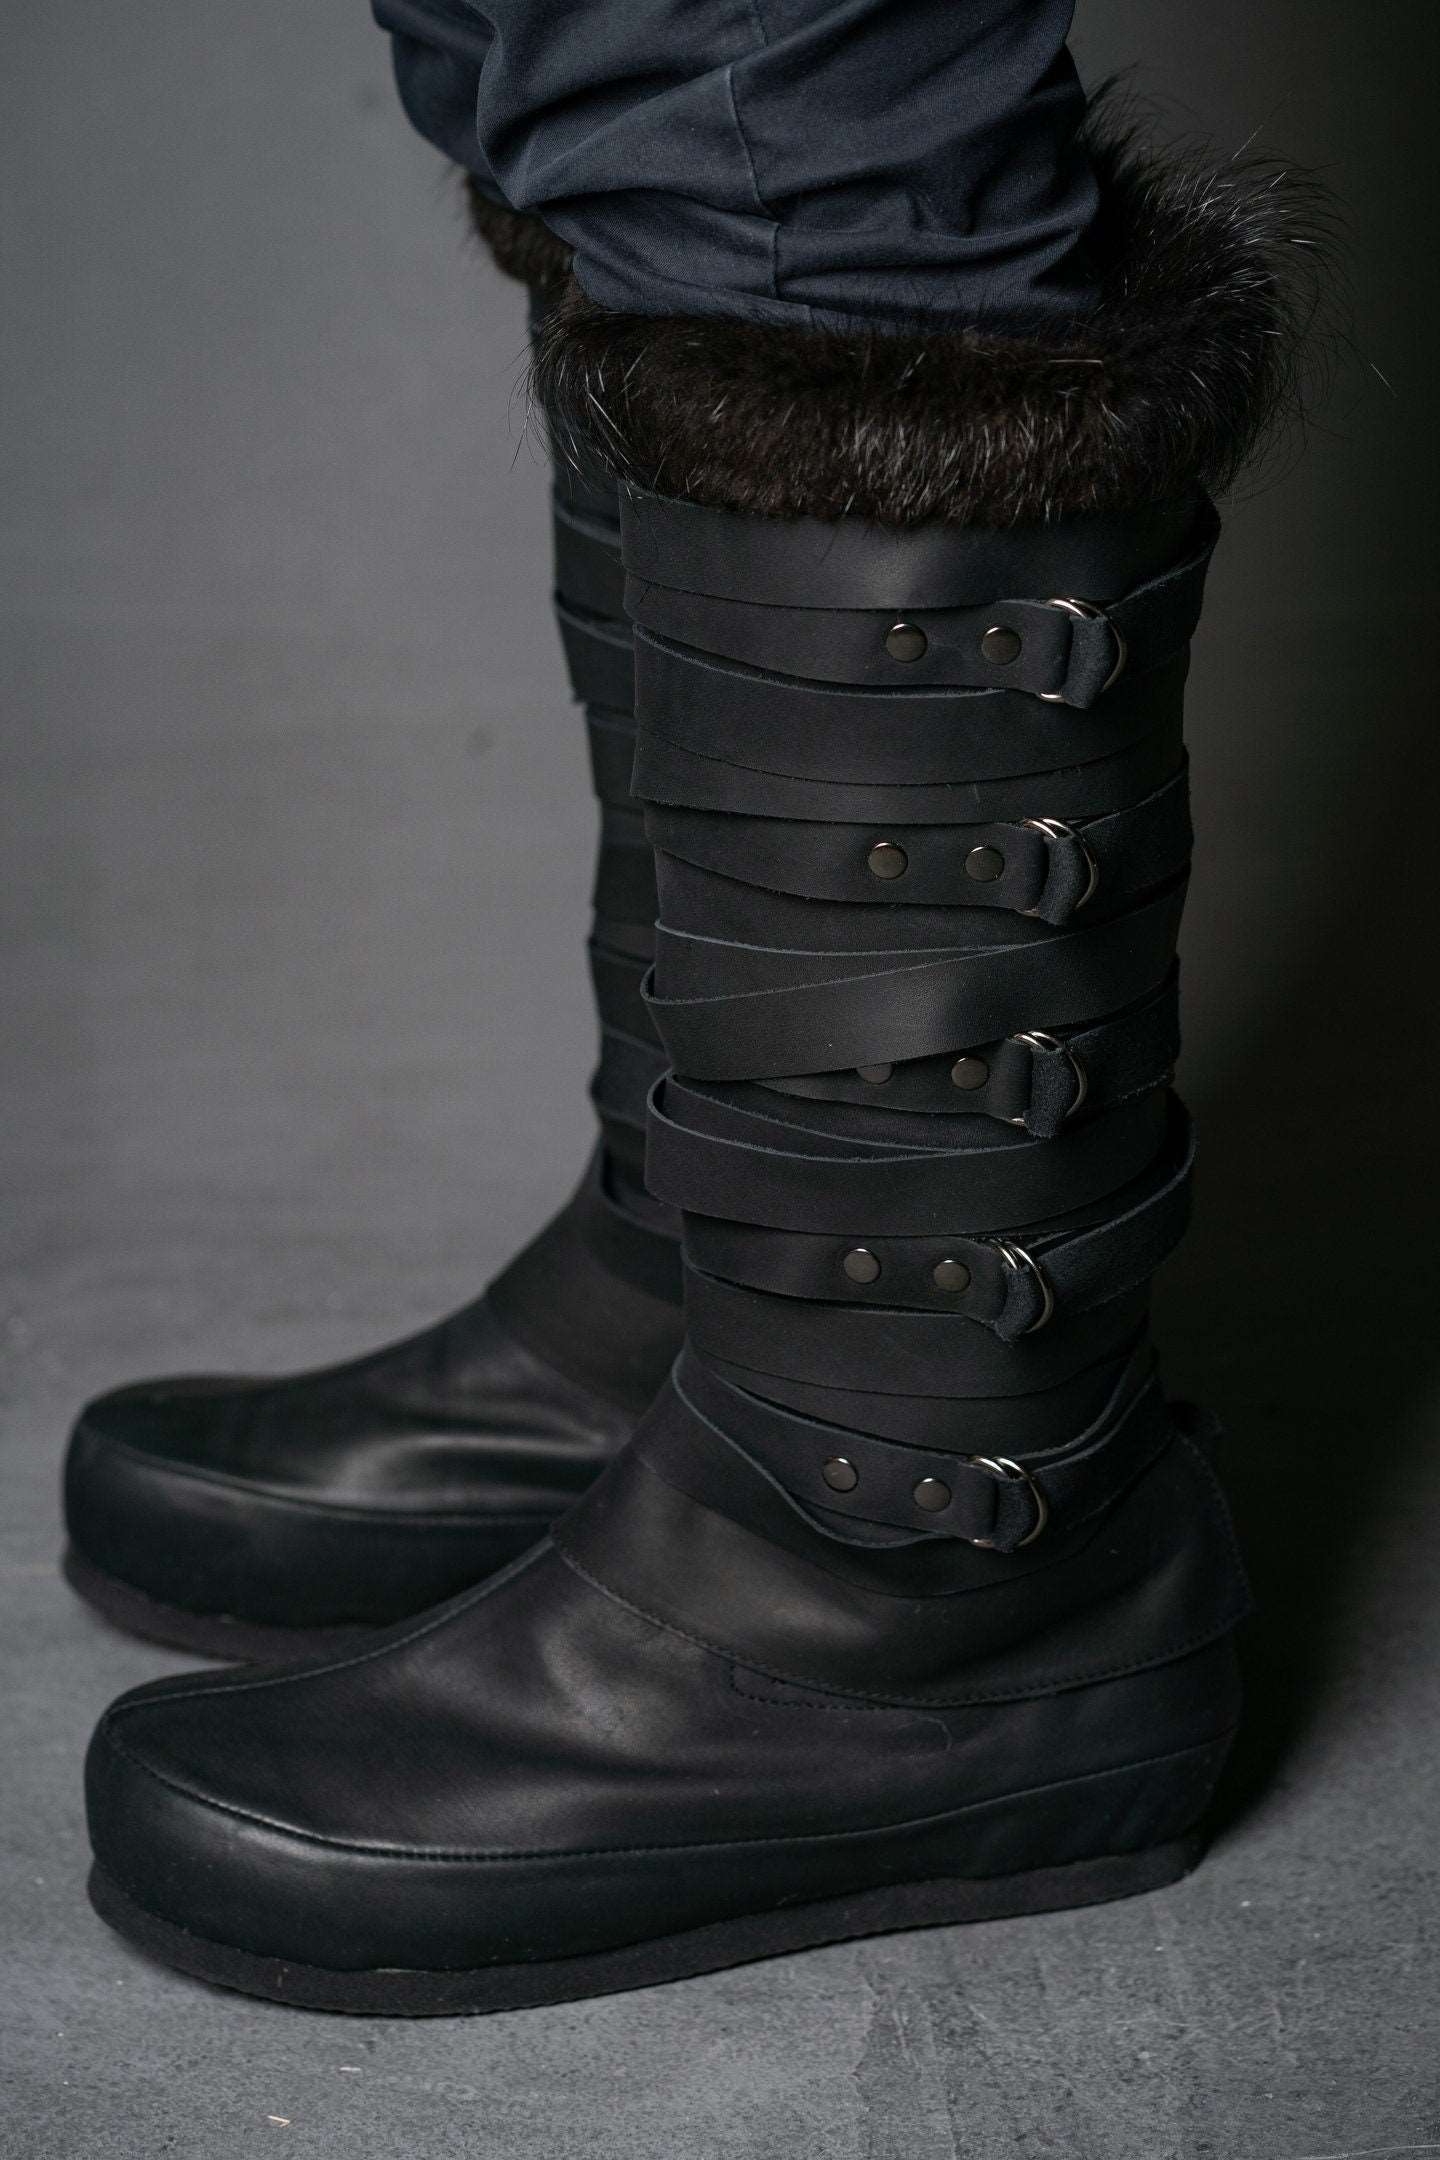 Assassin black leather low boots + greaves with fur